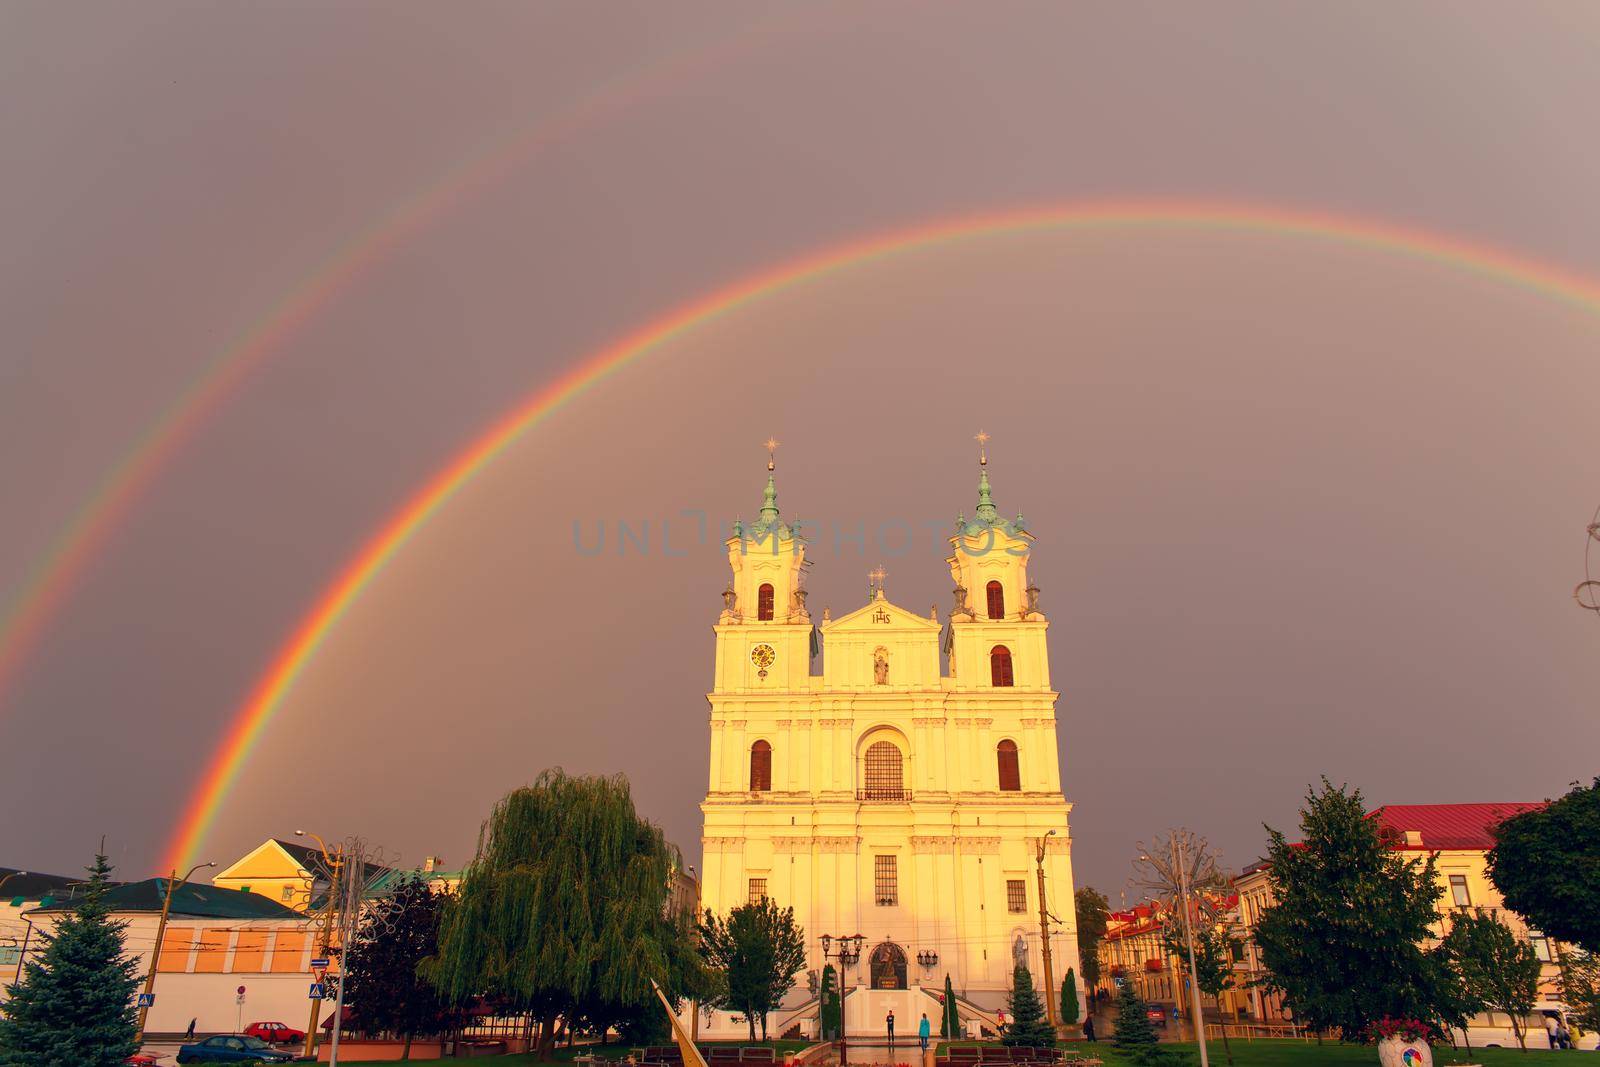 GRODNO, BELARUS - AUG 15: St. Francis Xavier Cathedral after rain in sunset light on 15 August, 2016 in Grodno, Belarus.